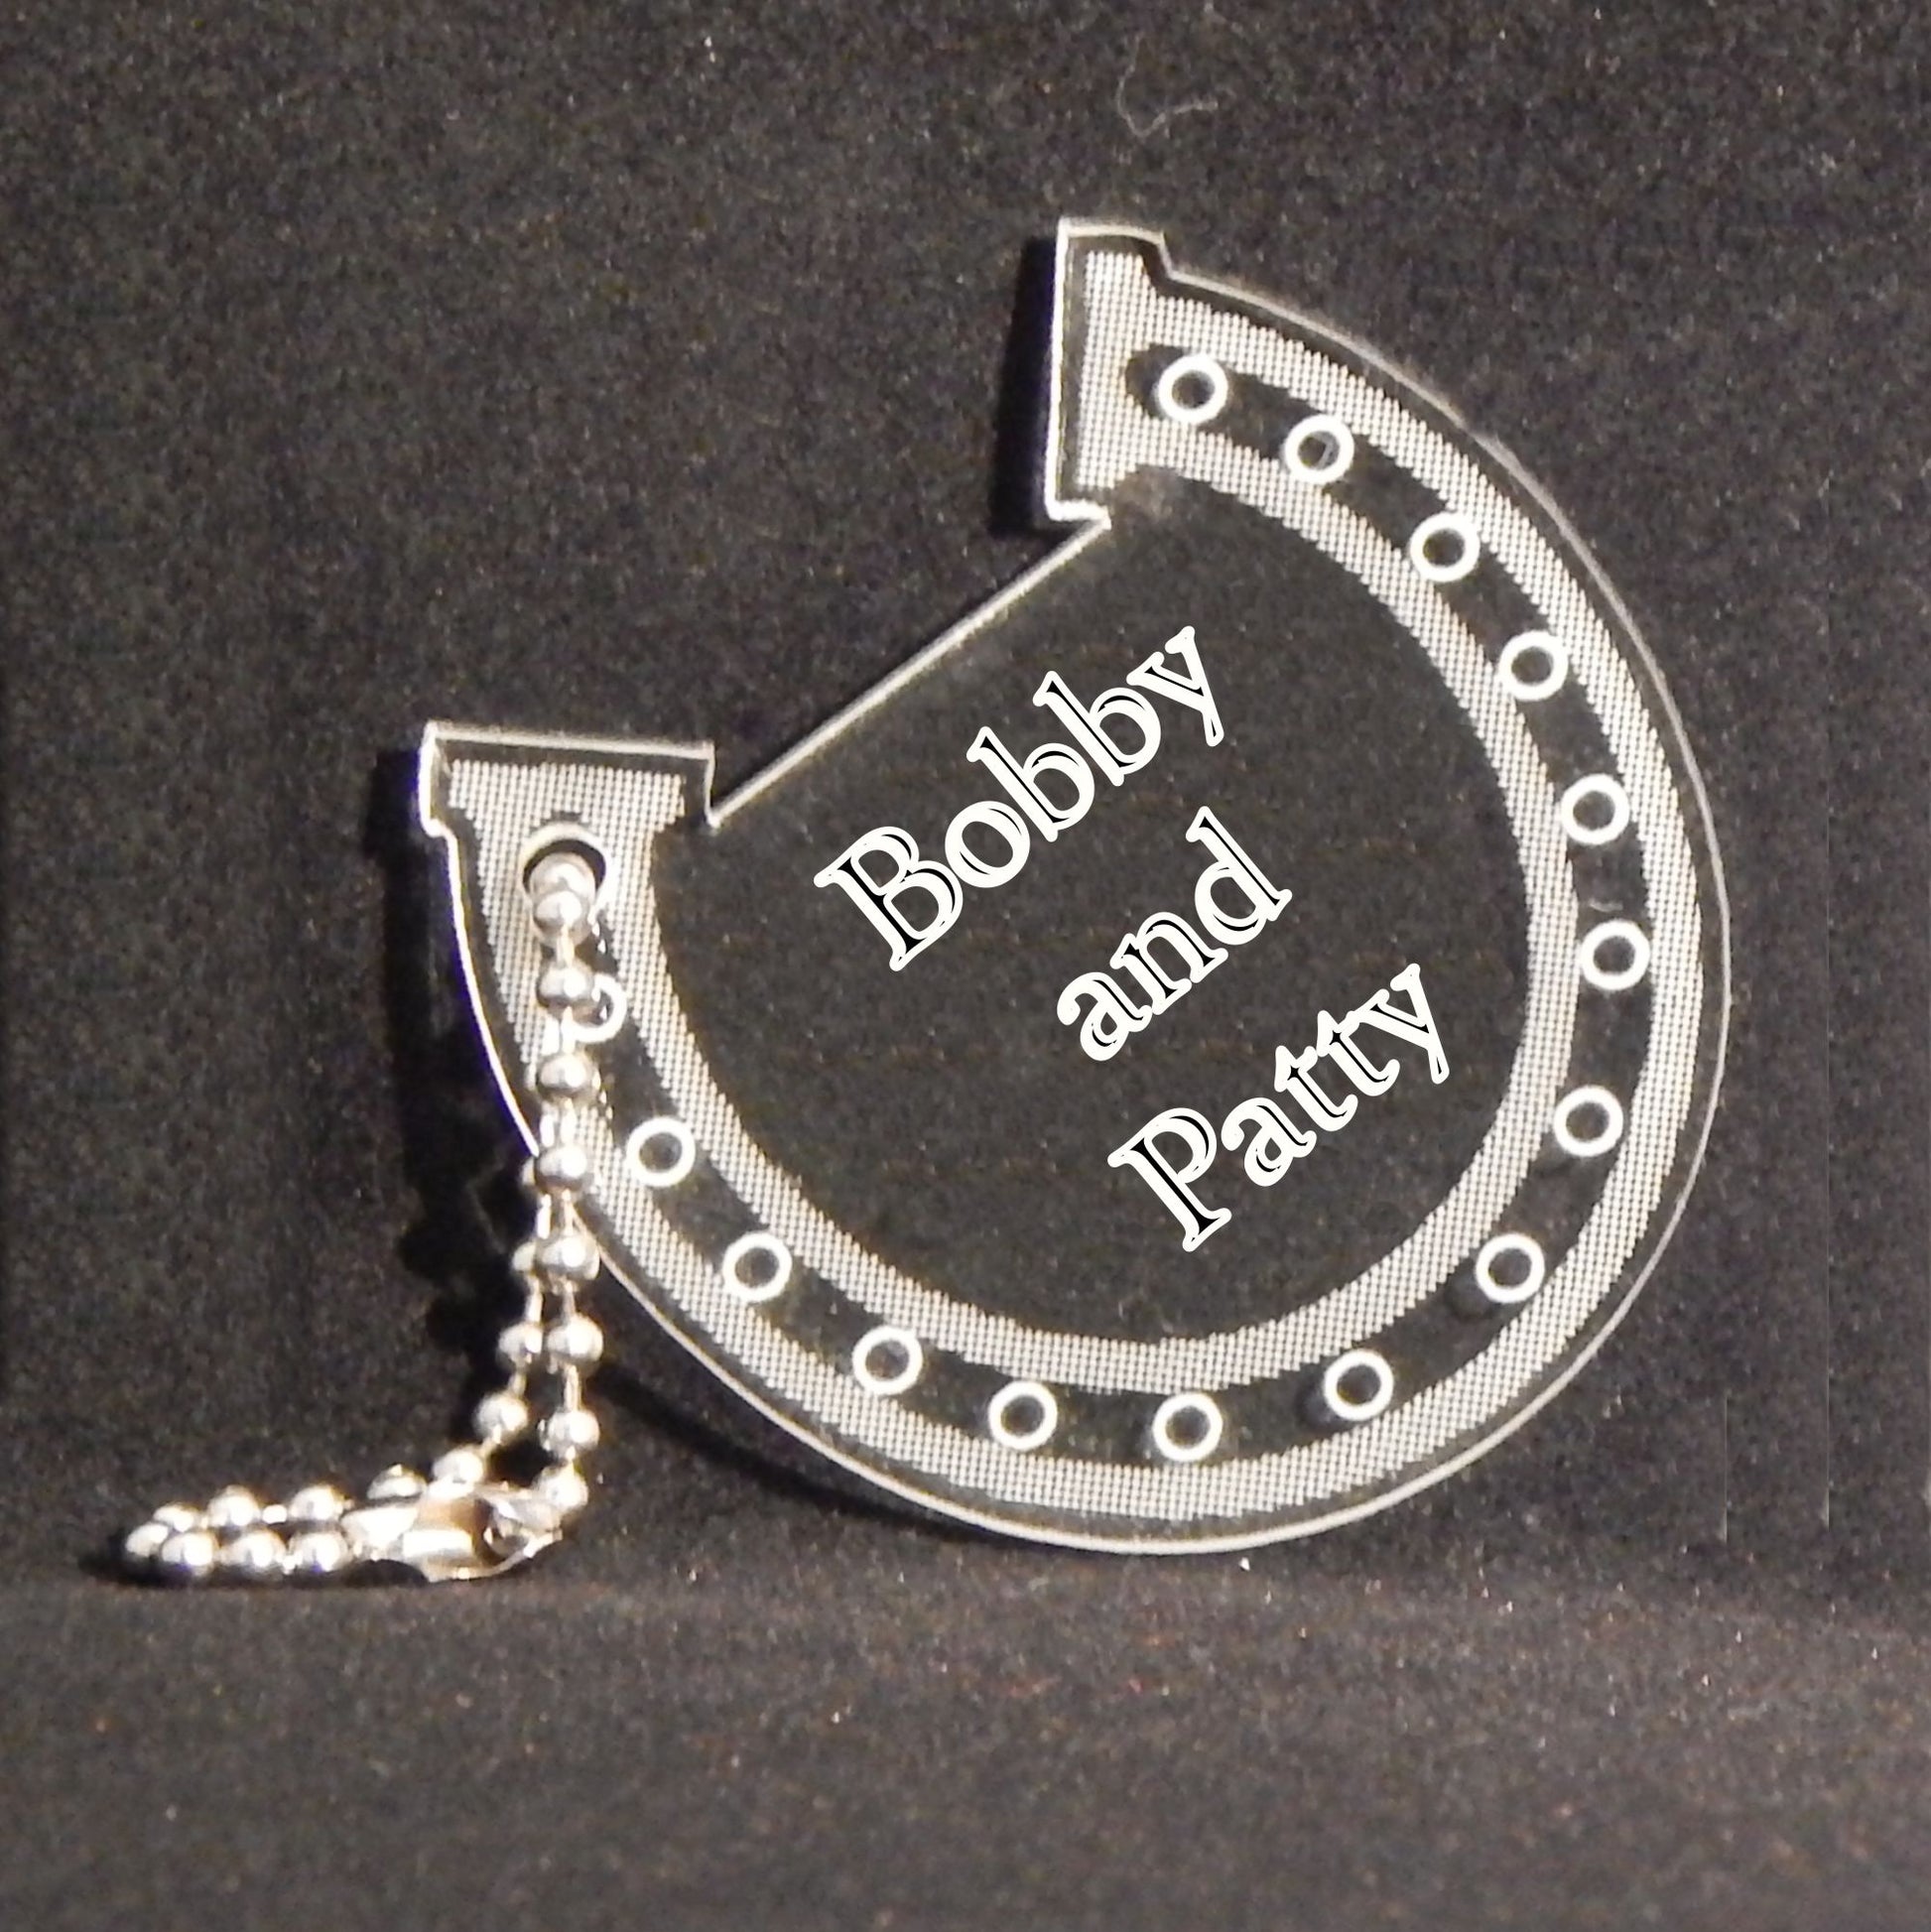 horseshoe shaped keychain engraved with names and attached to a small metal chain